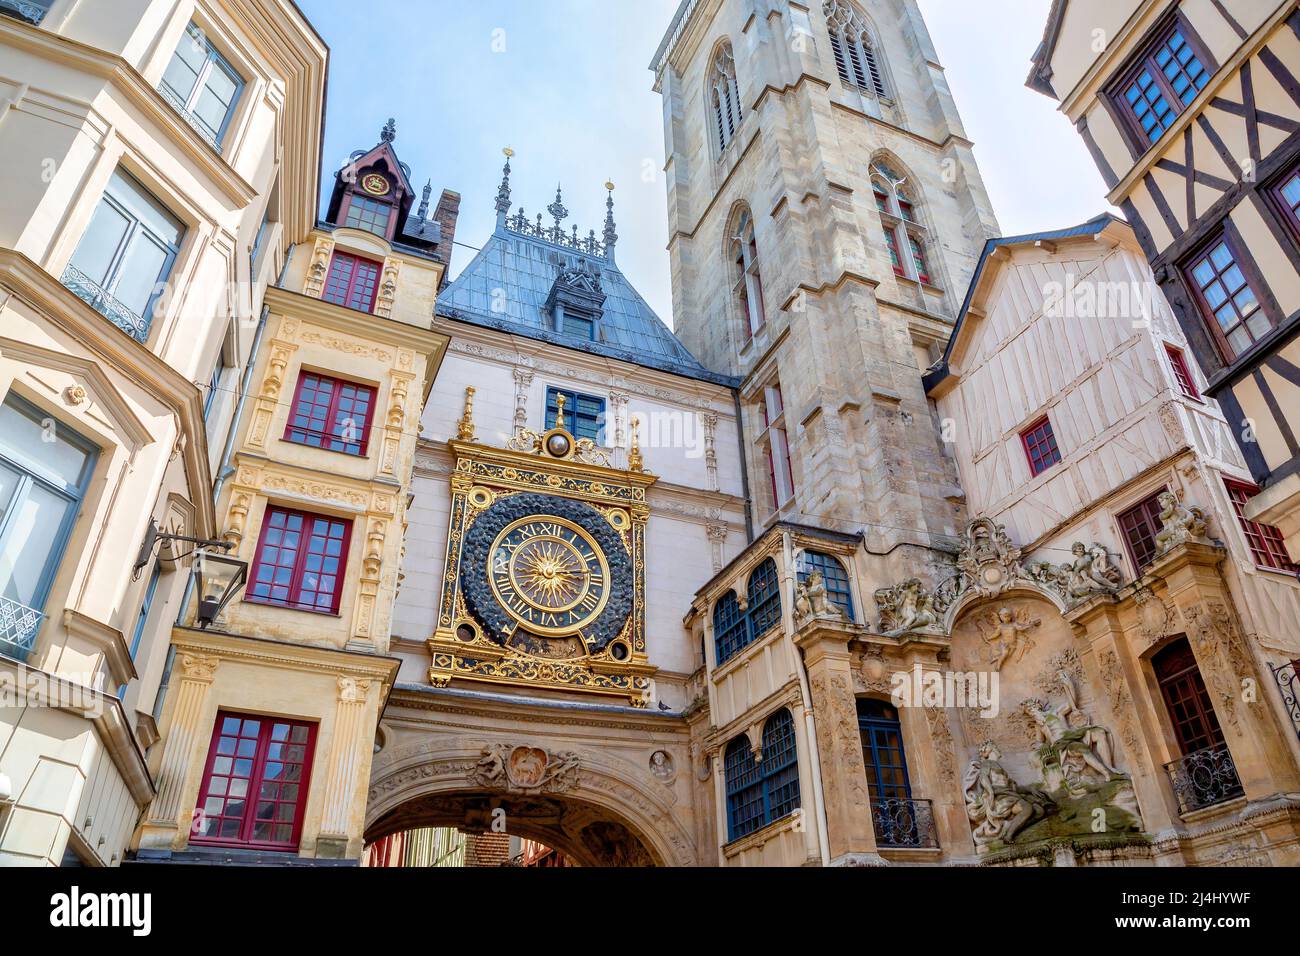 Le Gros Horloge in Rouen, Normandy, France Stock Photo